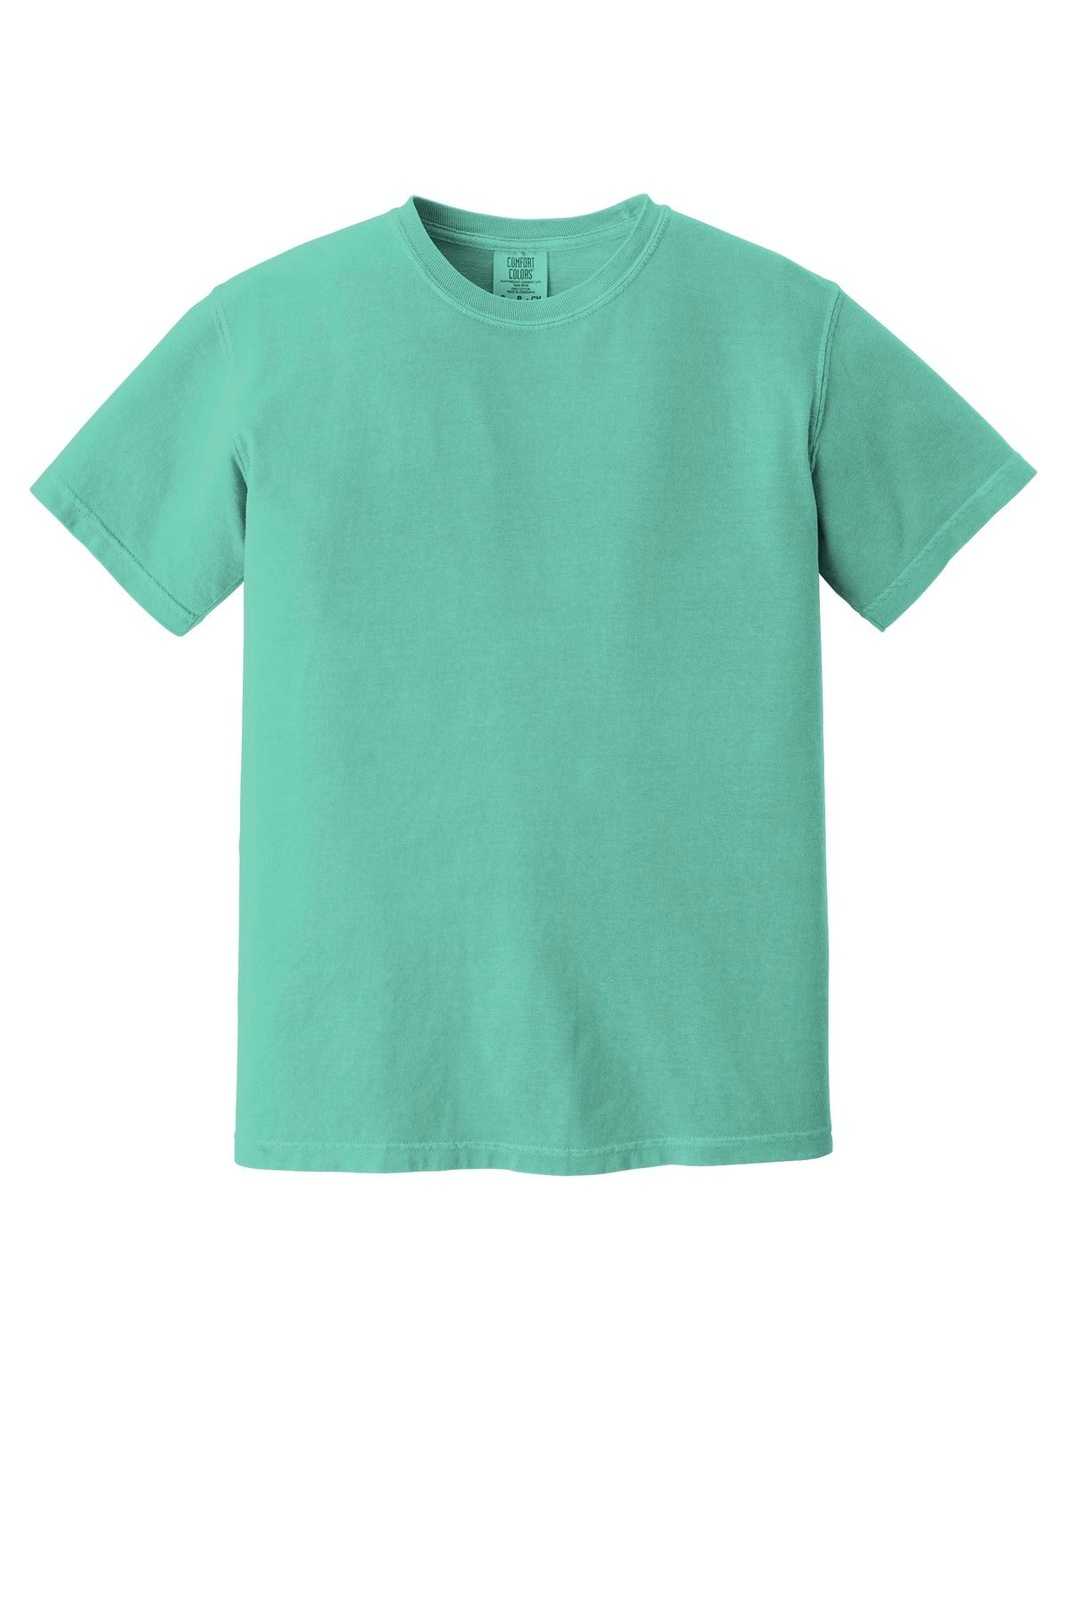 Comfort Colors 1717 Heavyweight Ring Spun Tee - Chalky Mint - HIT a Double